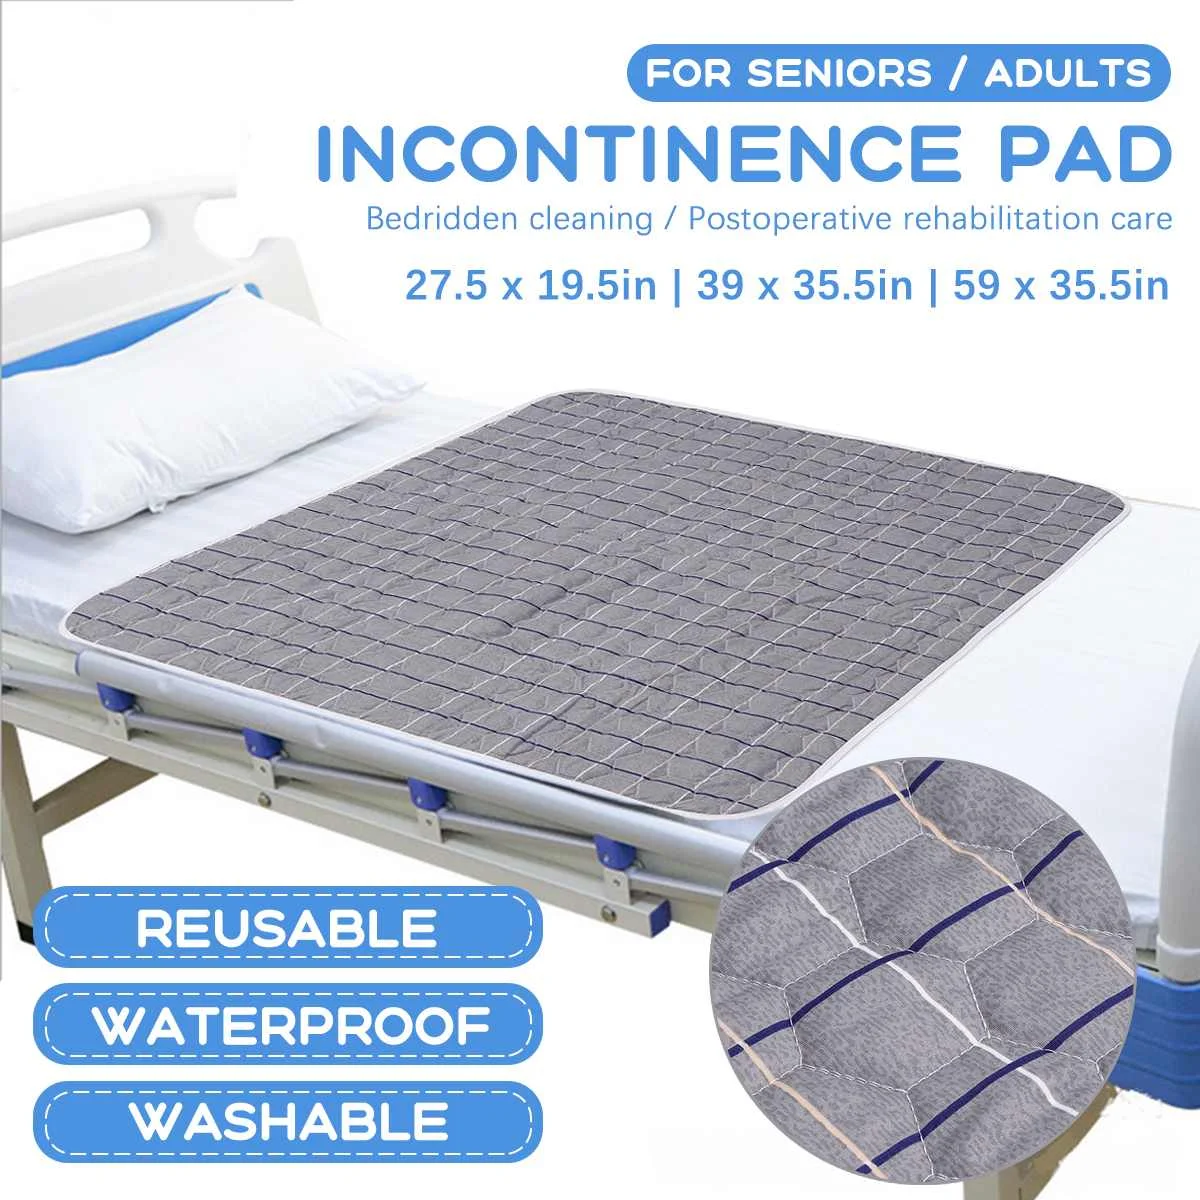 

Waterproof Changing Pad Bed Sheet Urine Mat Nappy Diaper Cover Washable Protector Incontinence Mattress For The Elder Kid Infant